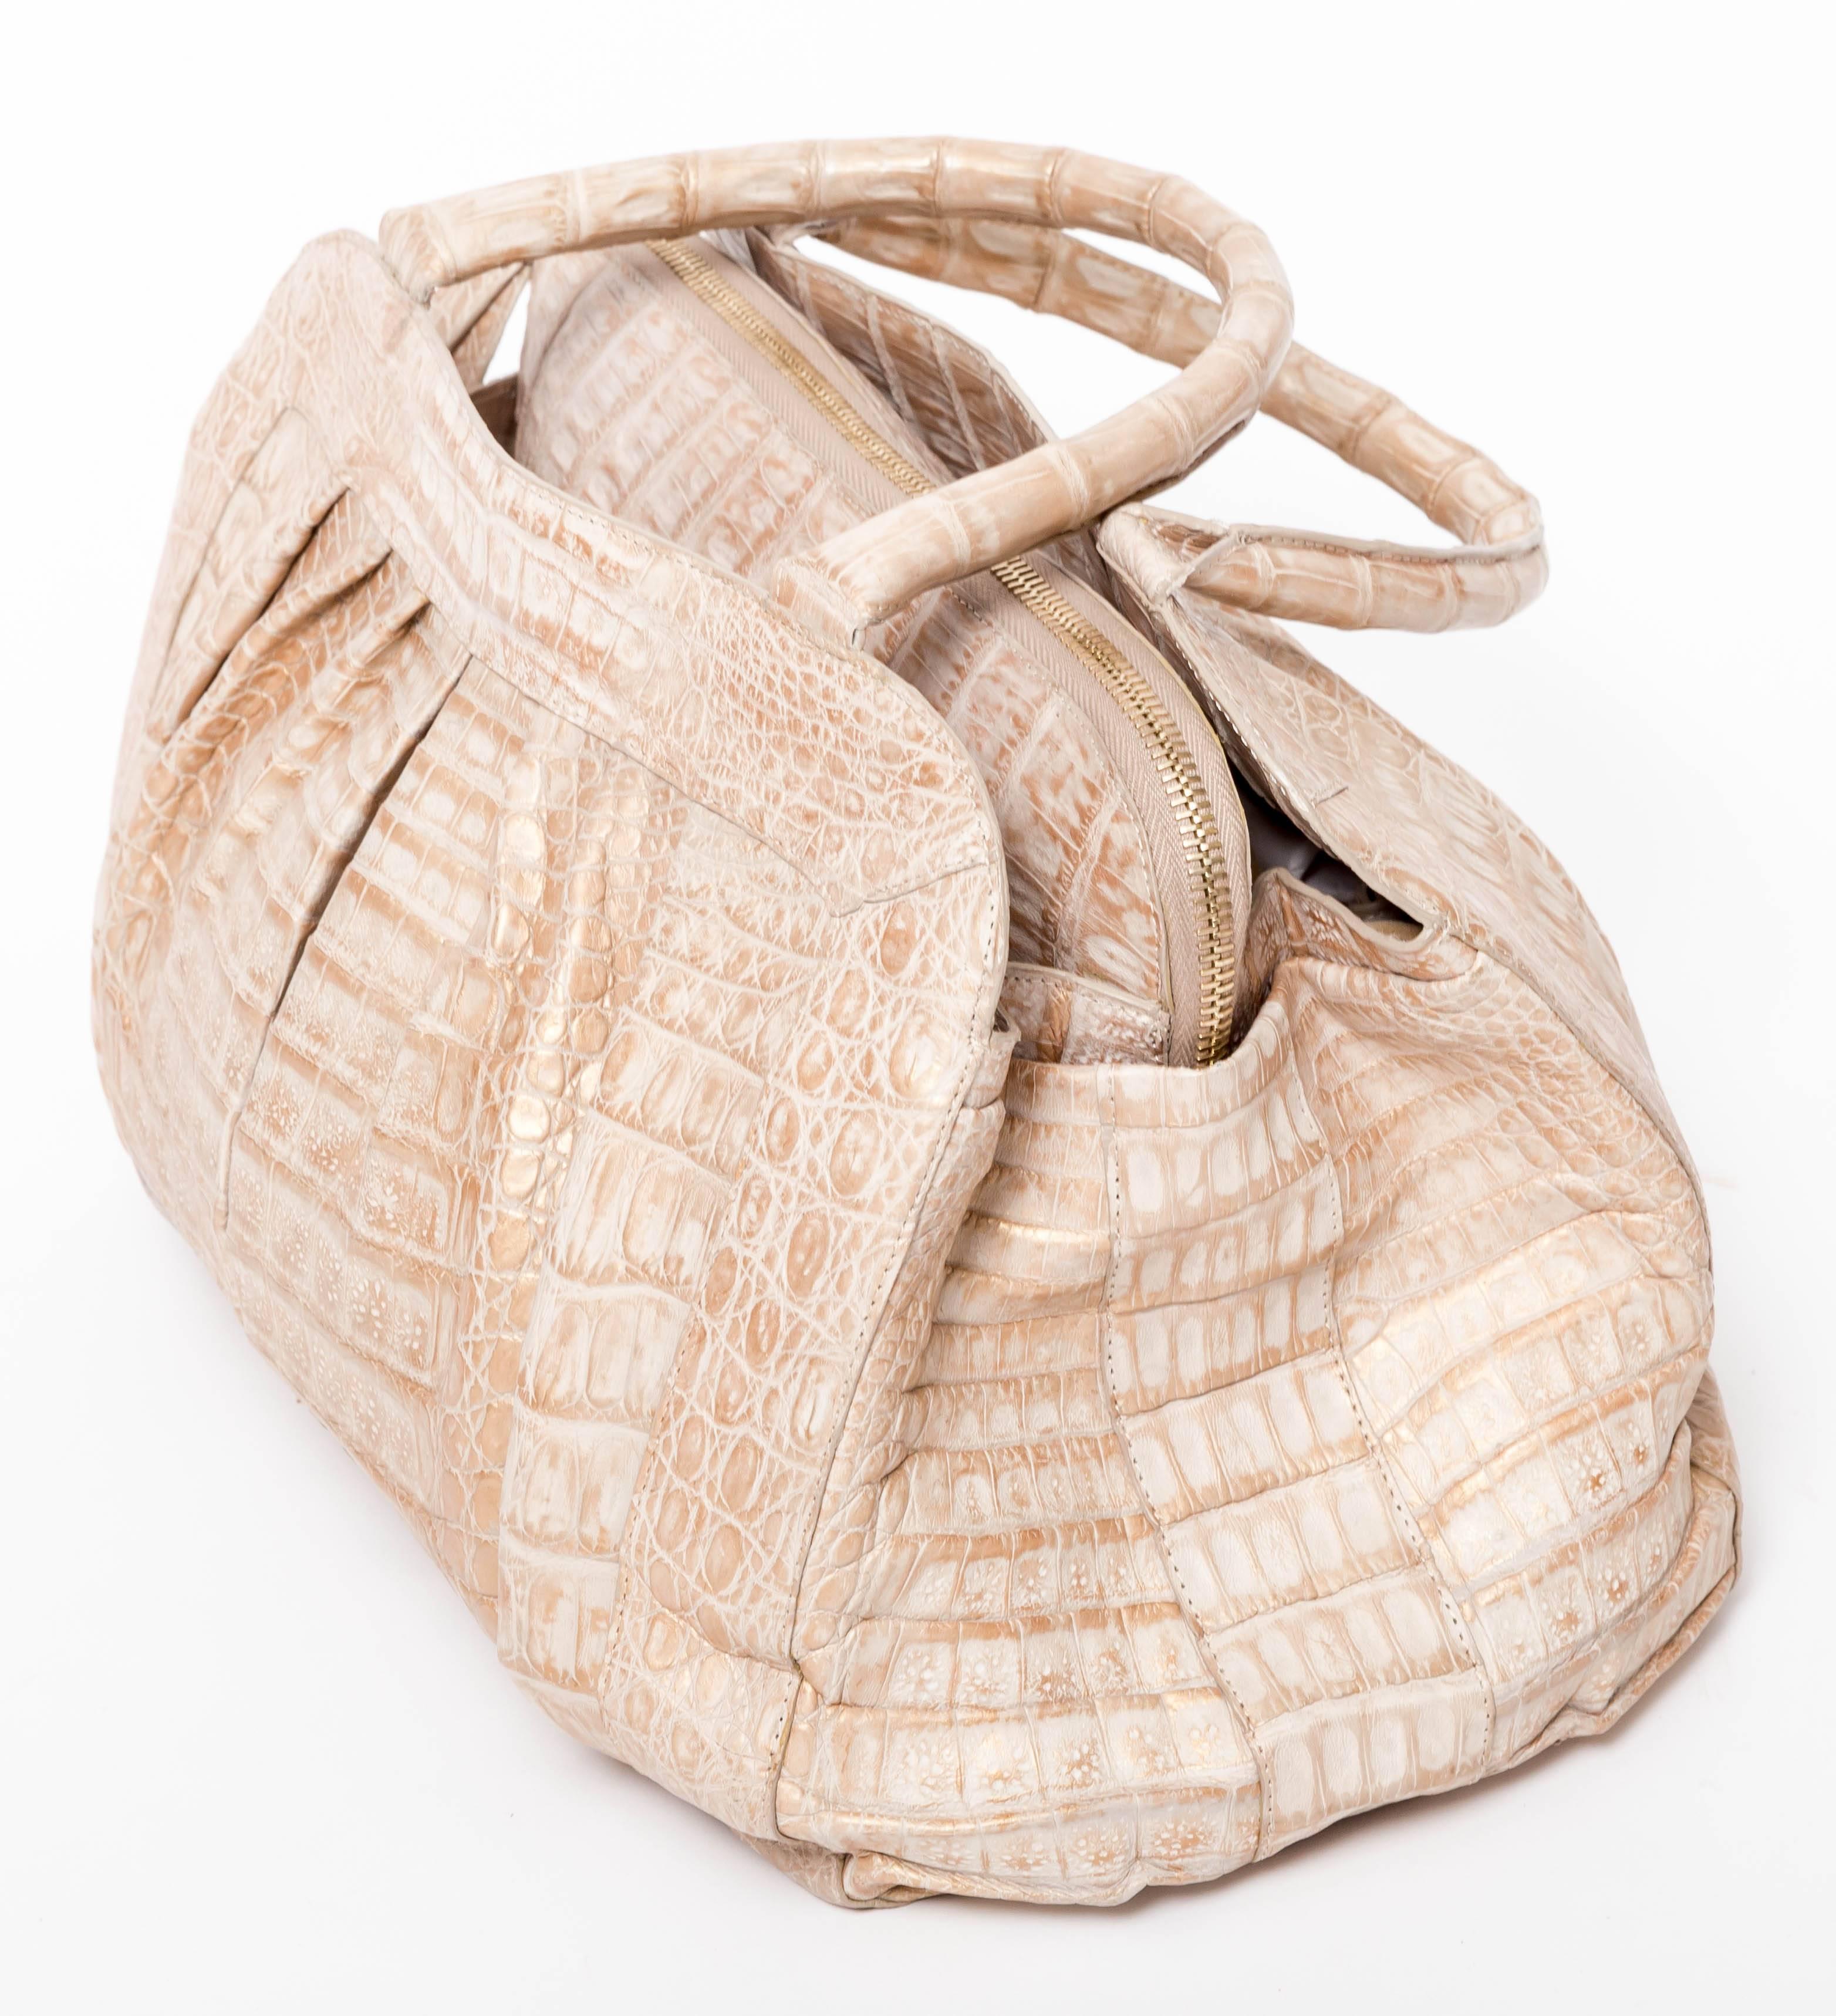 Nancy Gonzalez Structured Cream colored crocodile bag with metallic accents. This bag features two top handles and three center compartments. The central pocket zips closed while the pockets on either side close with a very strong invisible magnet.